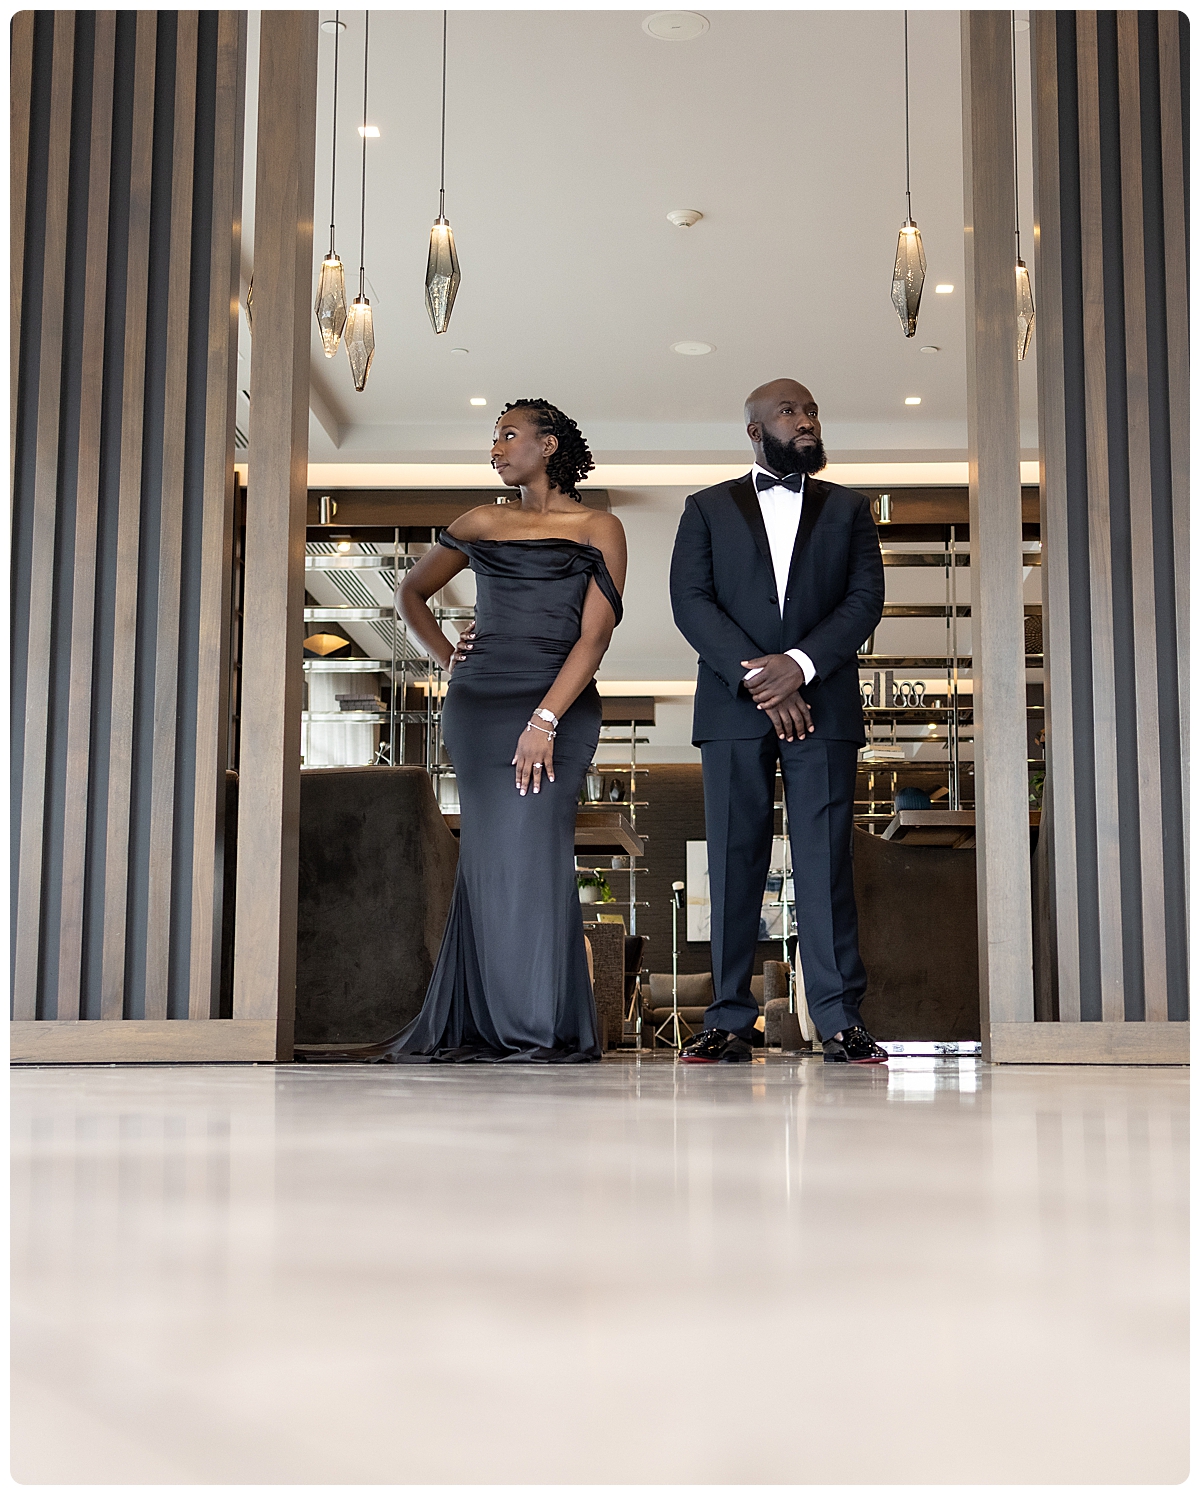 Engagement photoshoot at the Envue, Autograph Collection